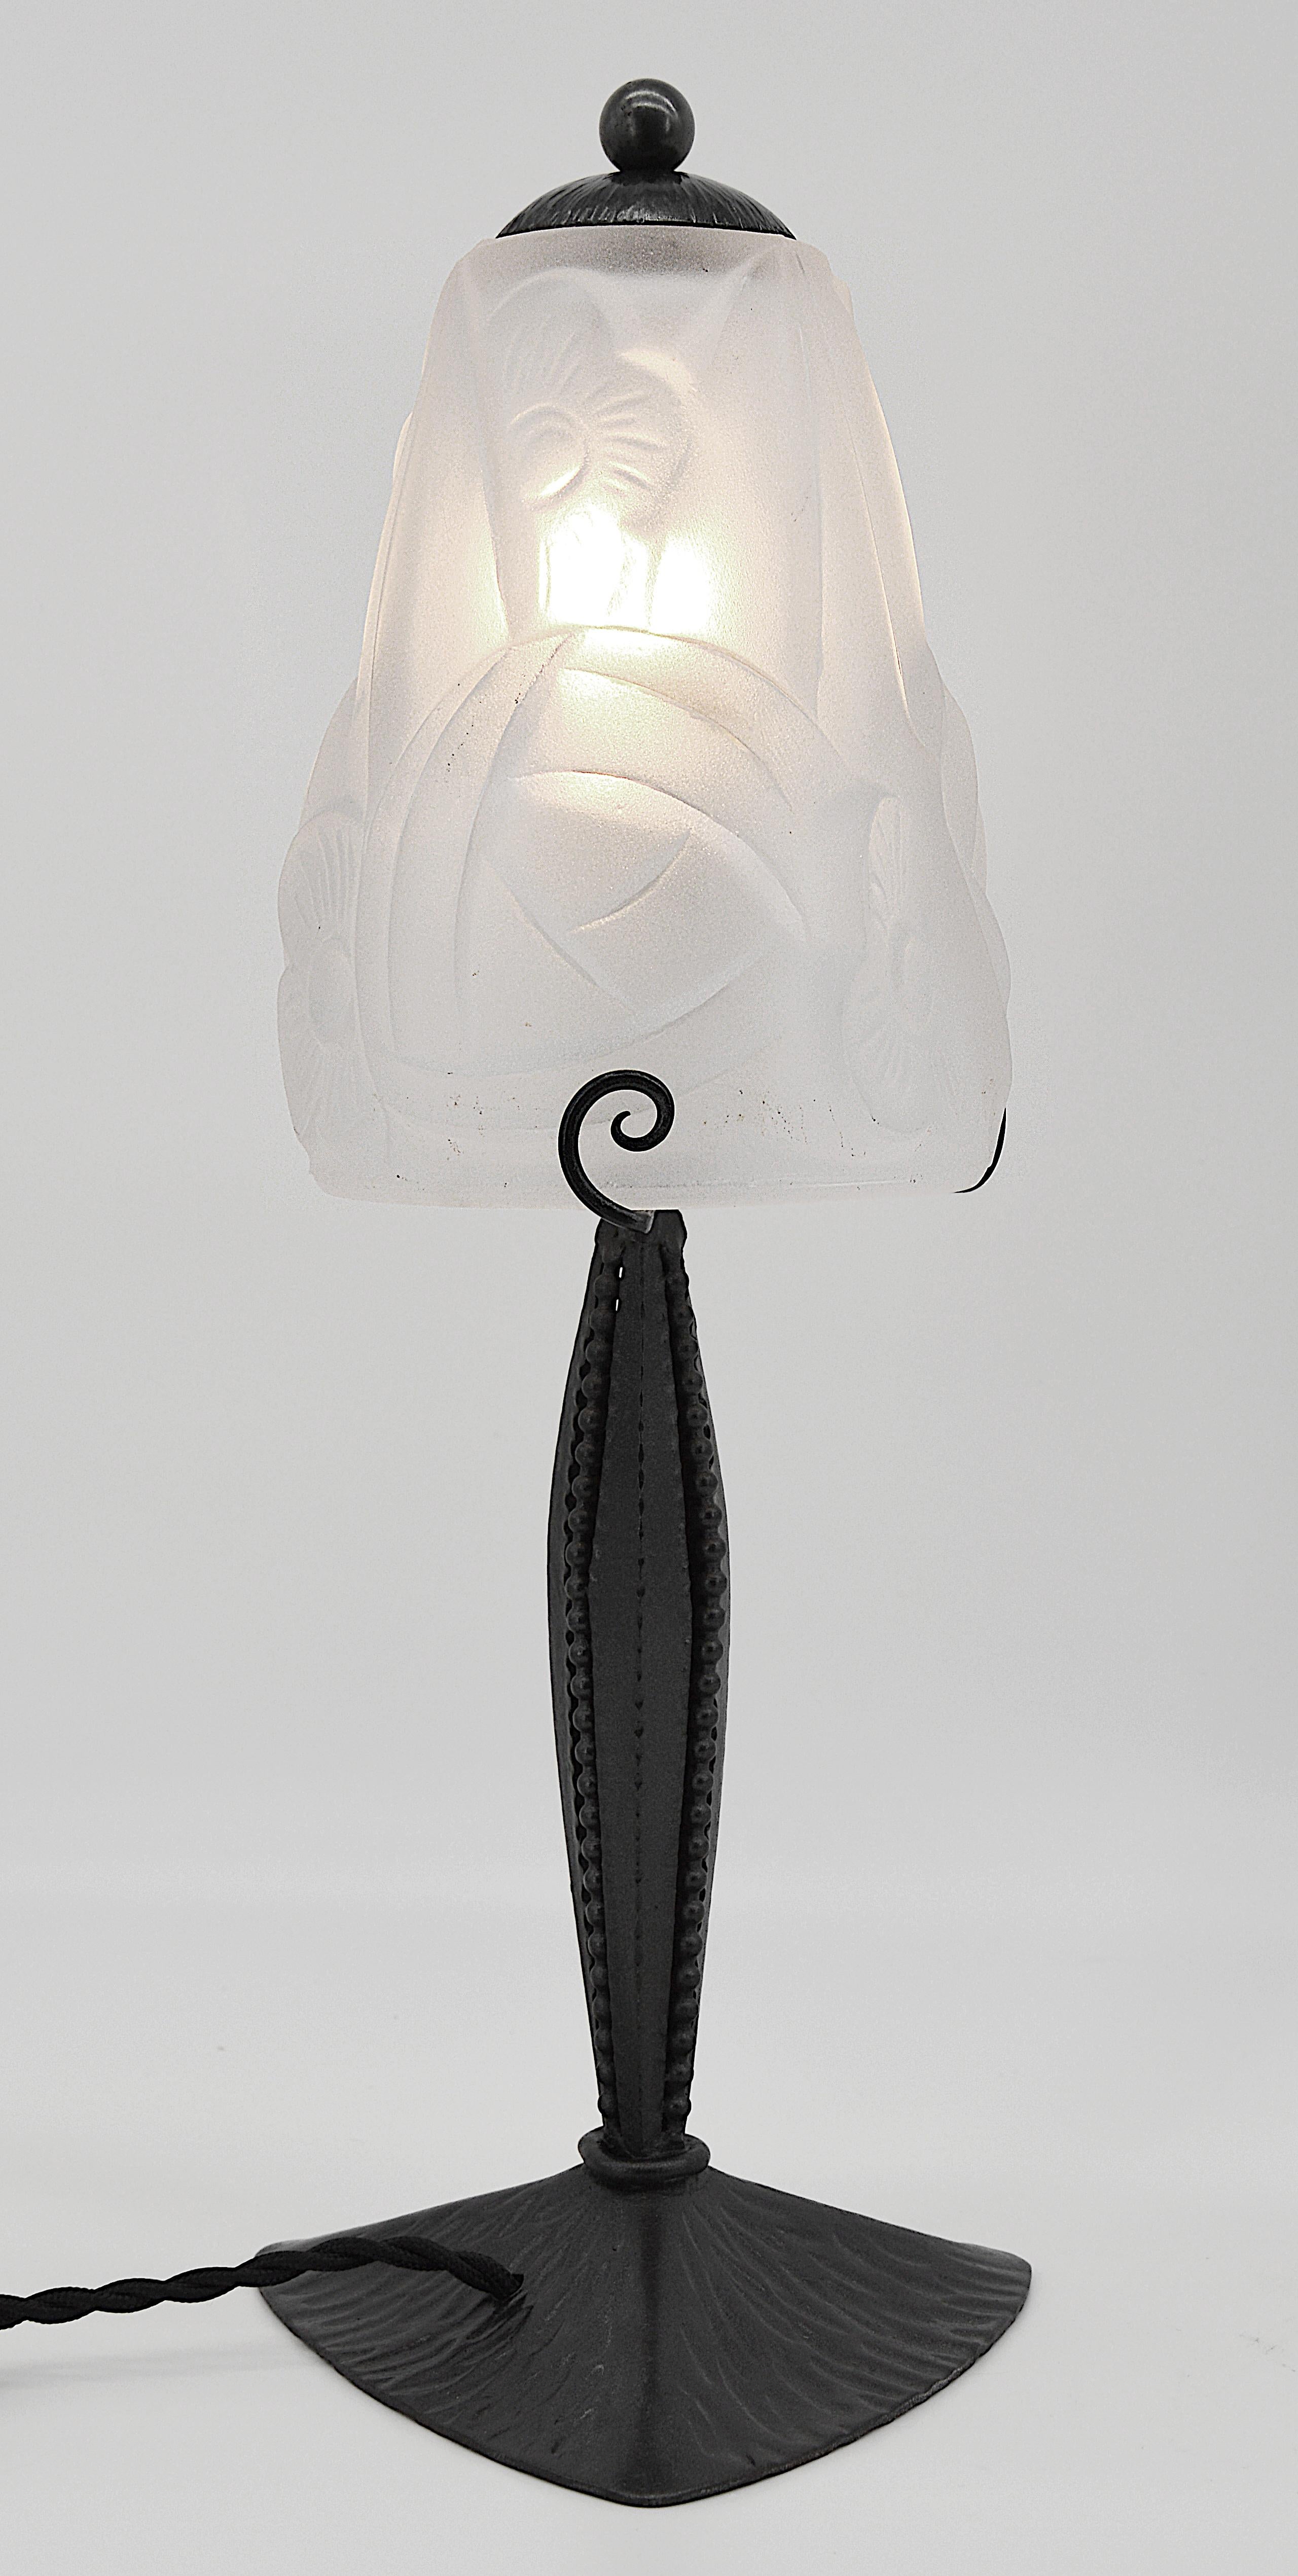 French Art Deco table lamp by Degue (Compiegne), France, late 1930s. Thick molded glass shade. Original wrought iron base. Measures: Height 14.2